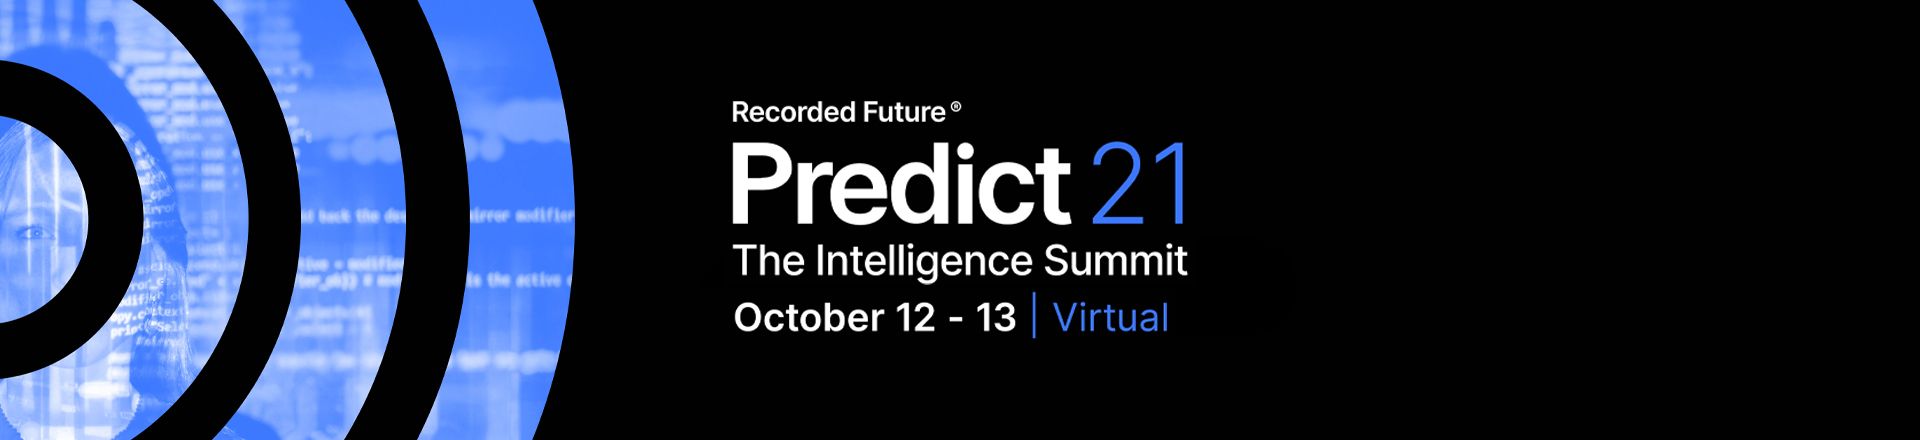 5 Notable Quotes from Predict21, Tuesday, October 12th